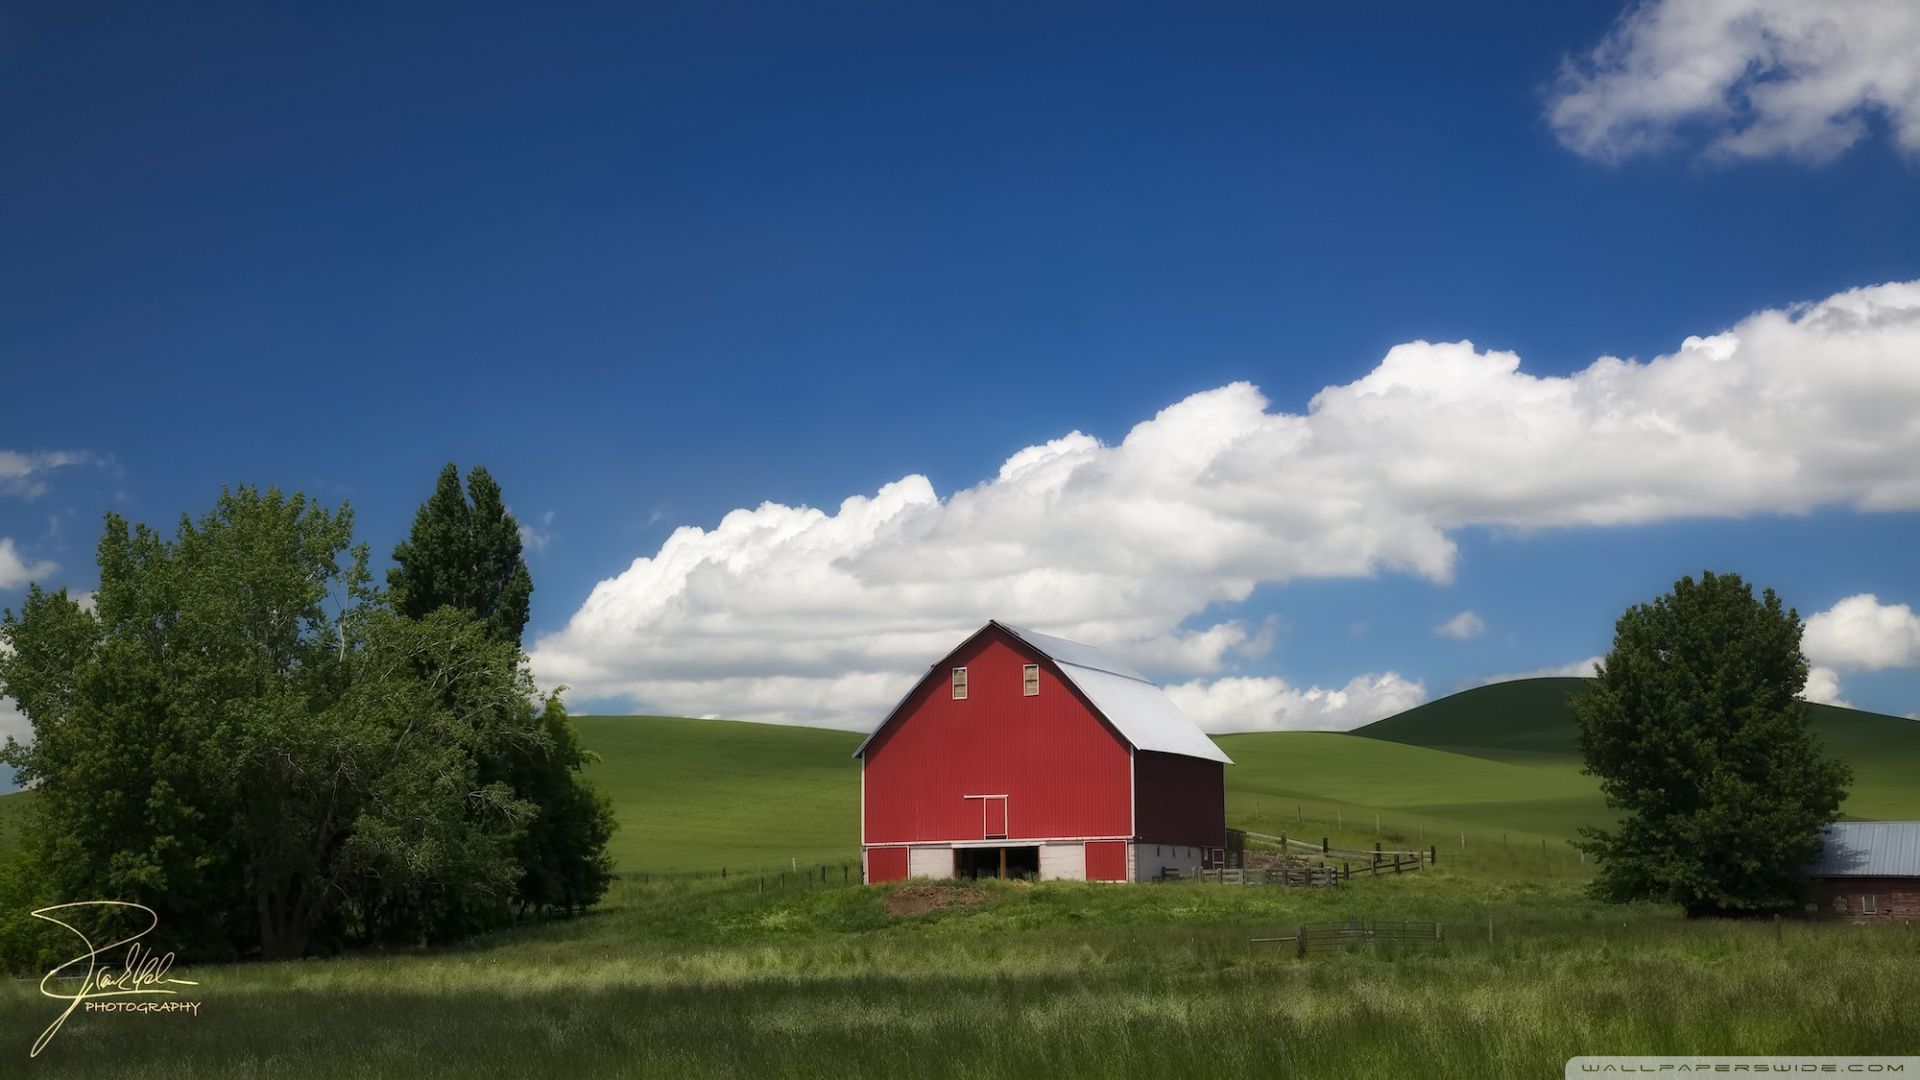 A red barn in a field of green grass with a blue sky and white clouds in the background. - Farm